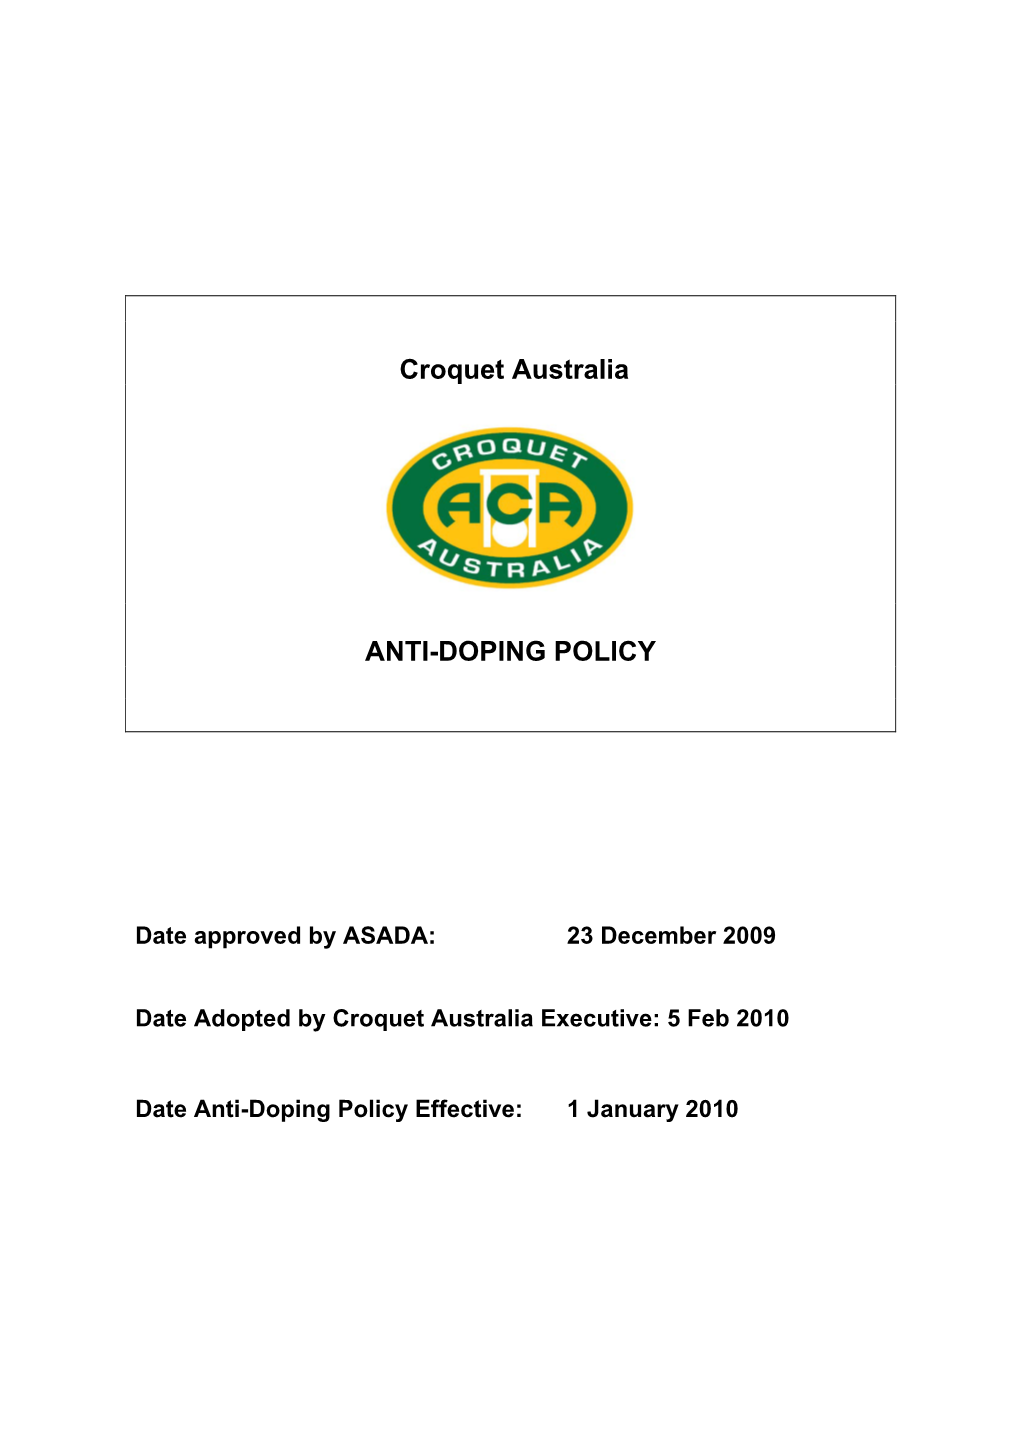 5 Feb 2010 Date Anti-Doping Policy Effective